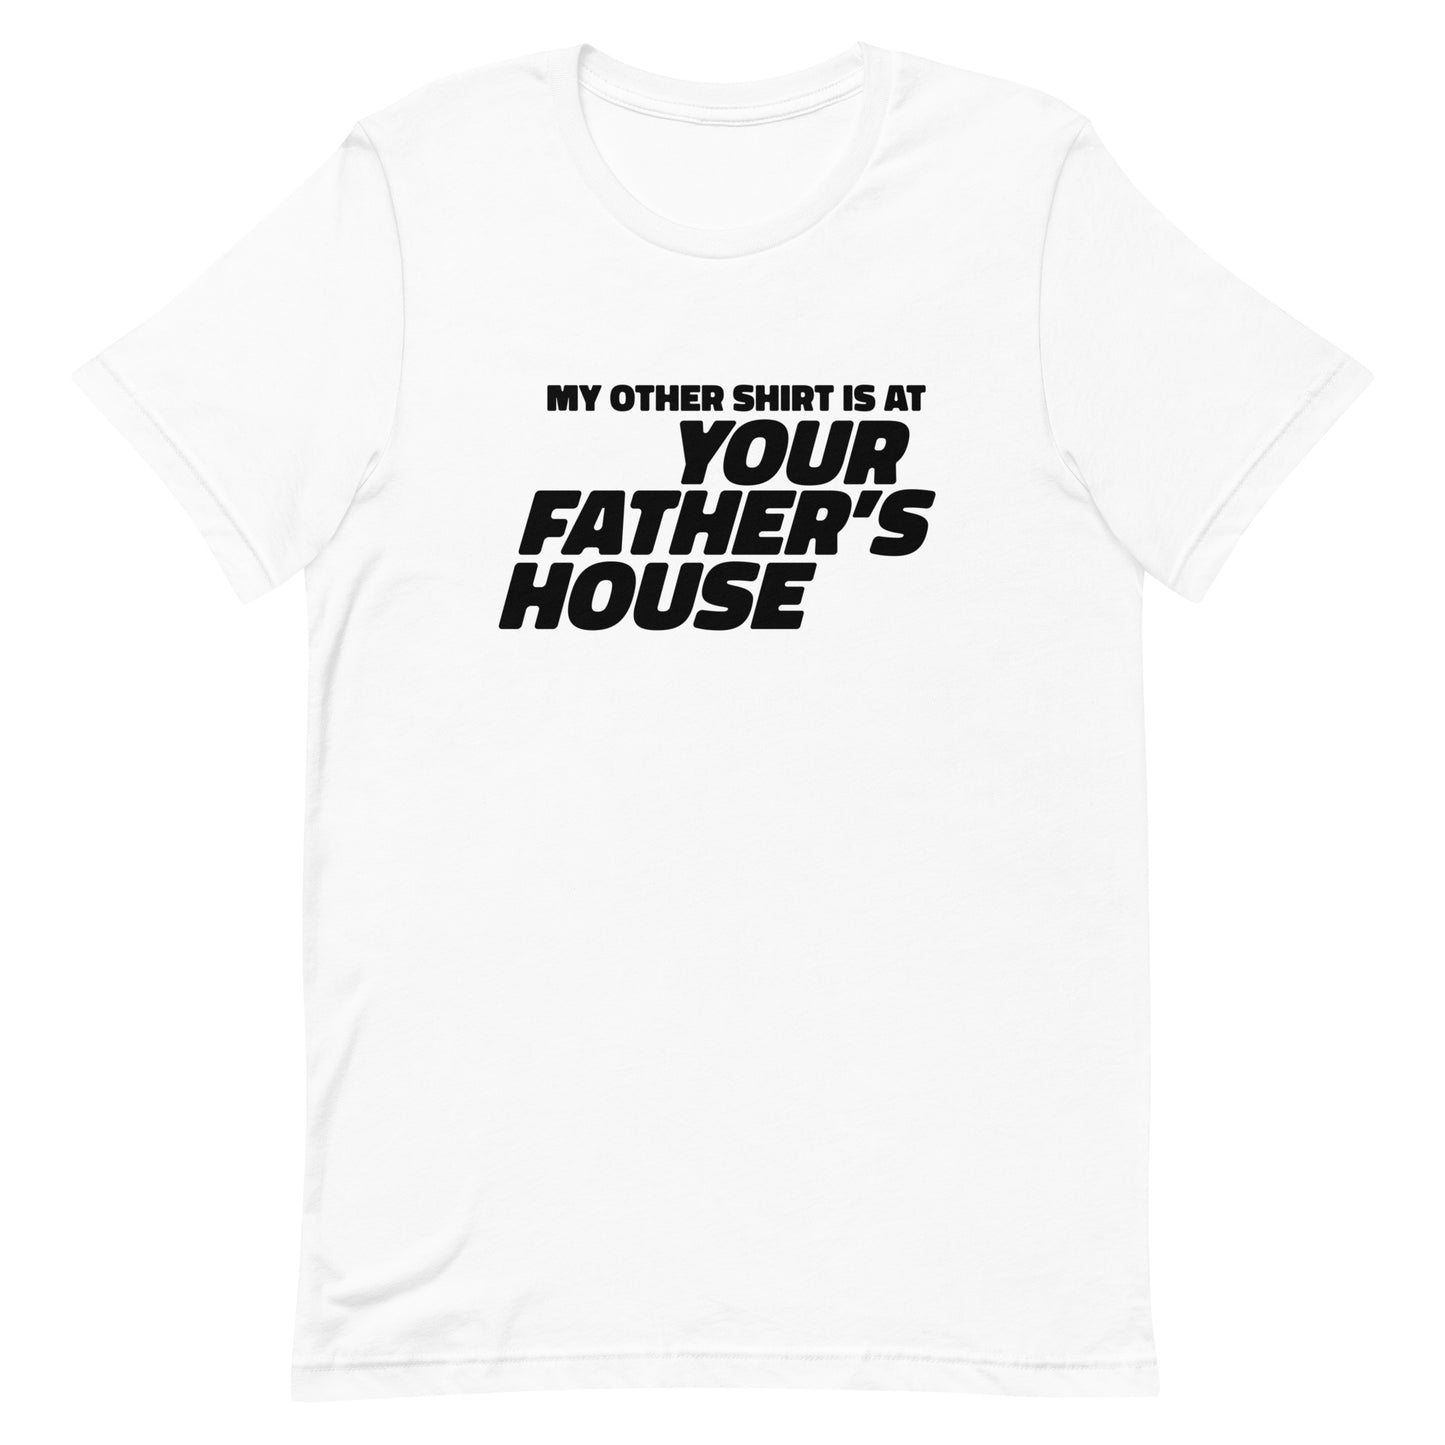 My Other Shirt is at Your Father's House Unisex t-shirt